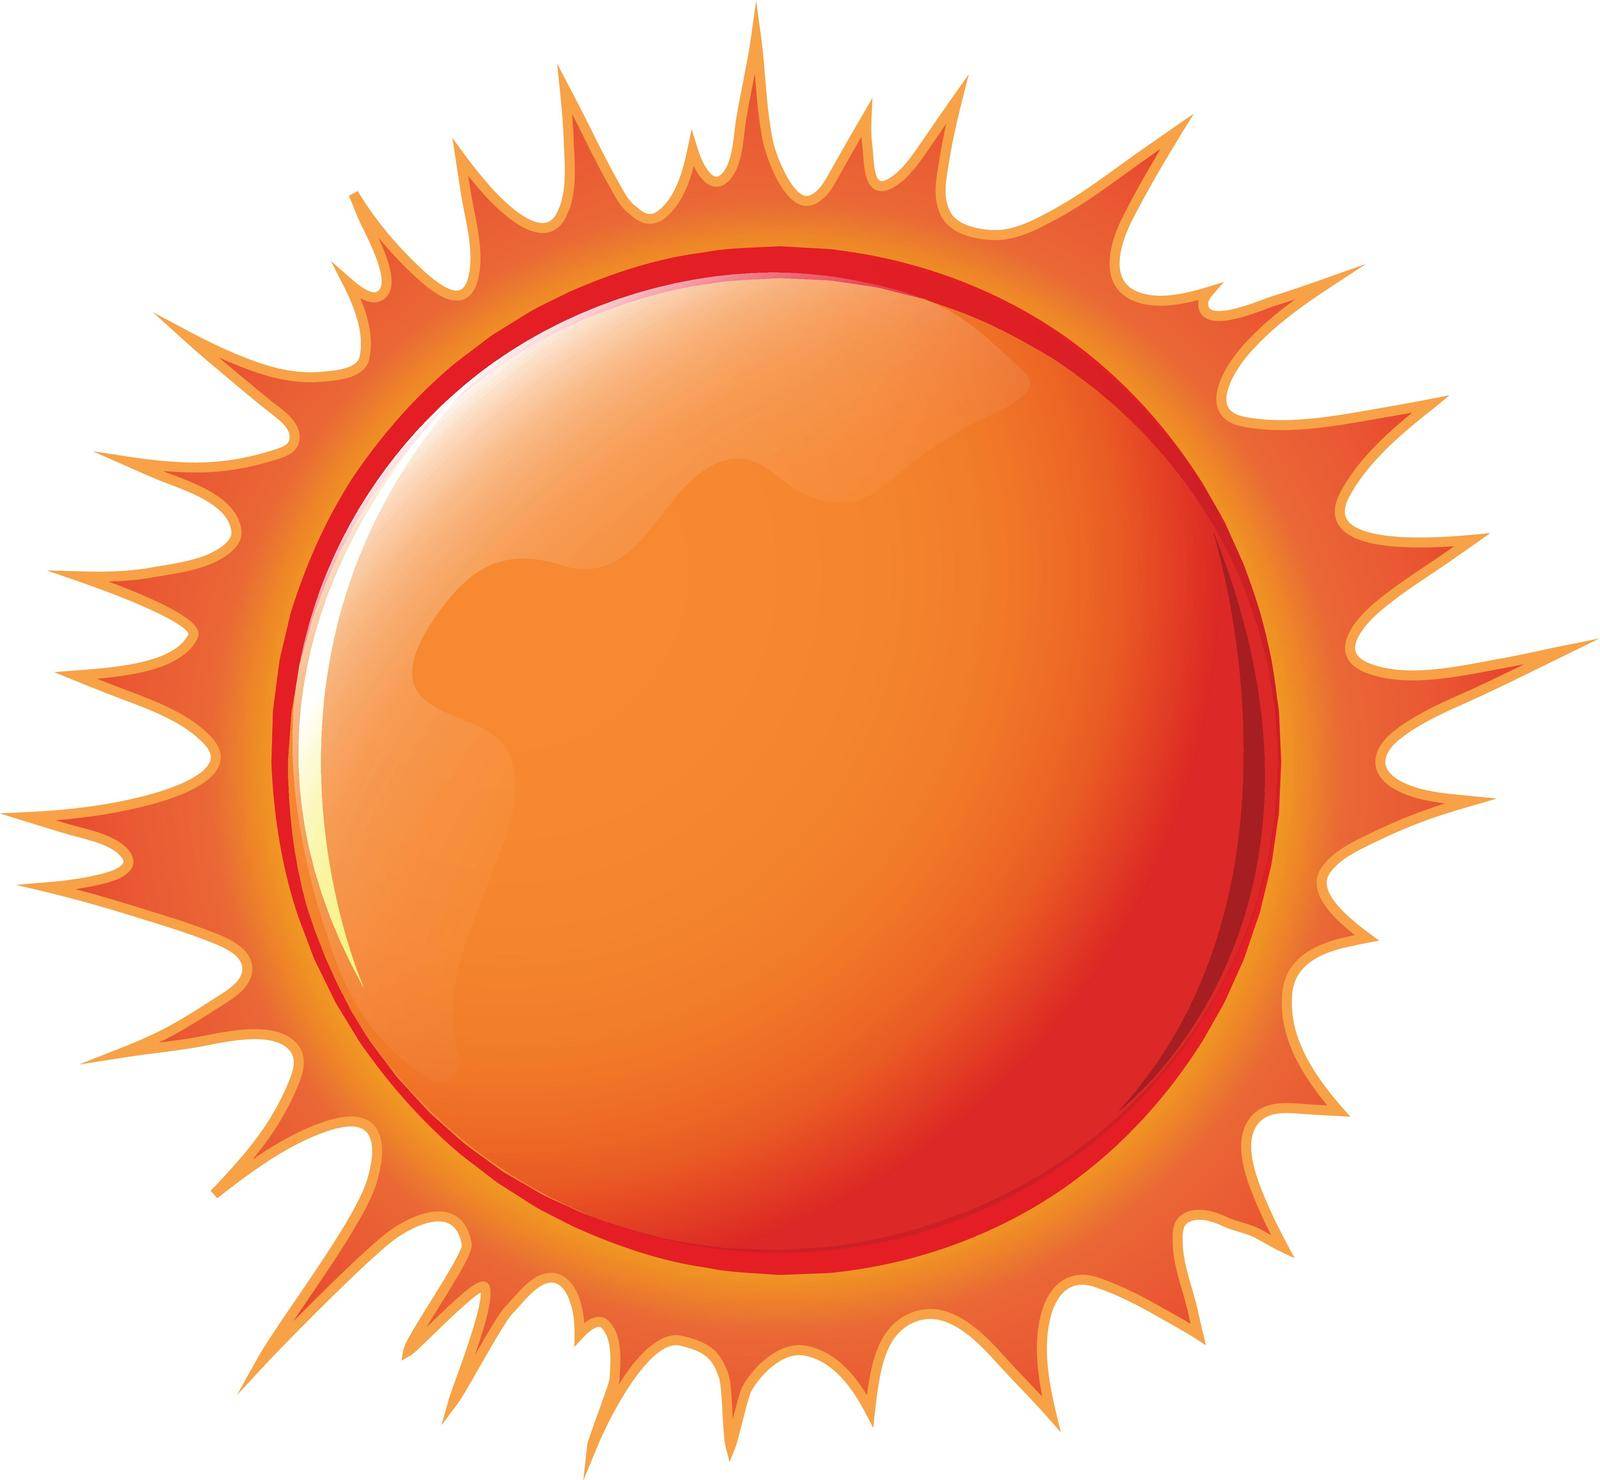 Illustration of the sun on a white background